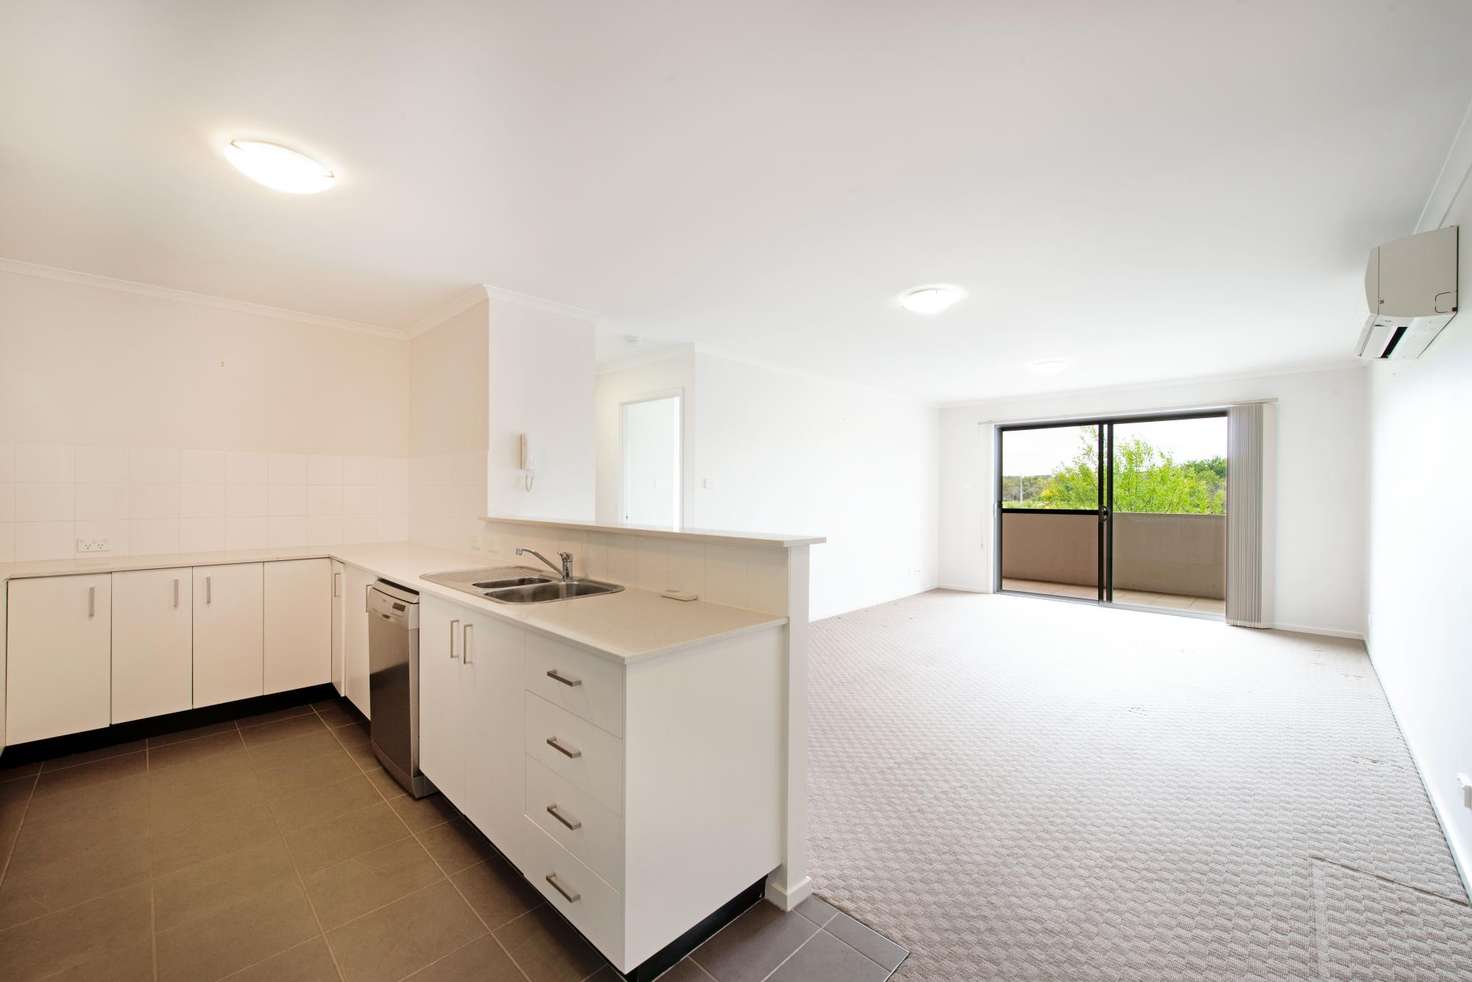 Main view of Homely apartment listing, 22/21 Wiseman Street, Macquarie ACT 2614